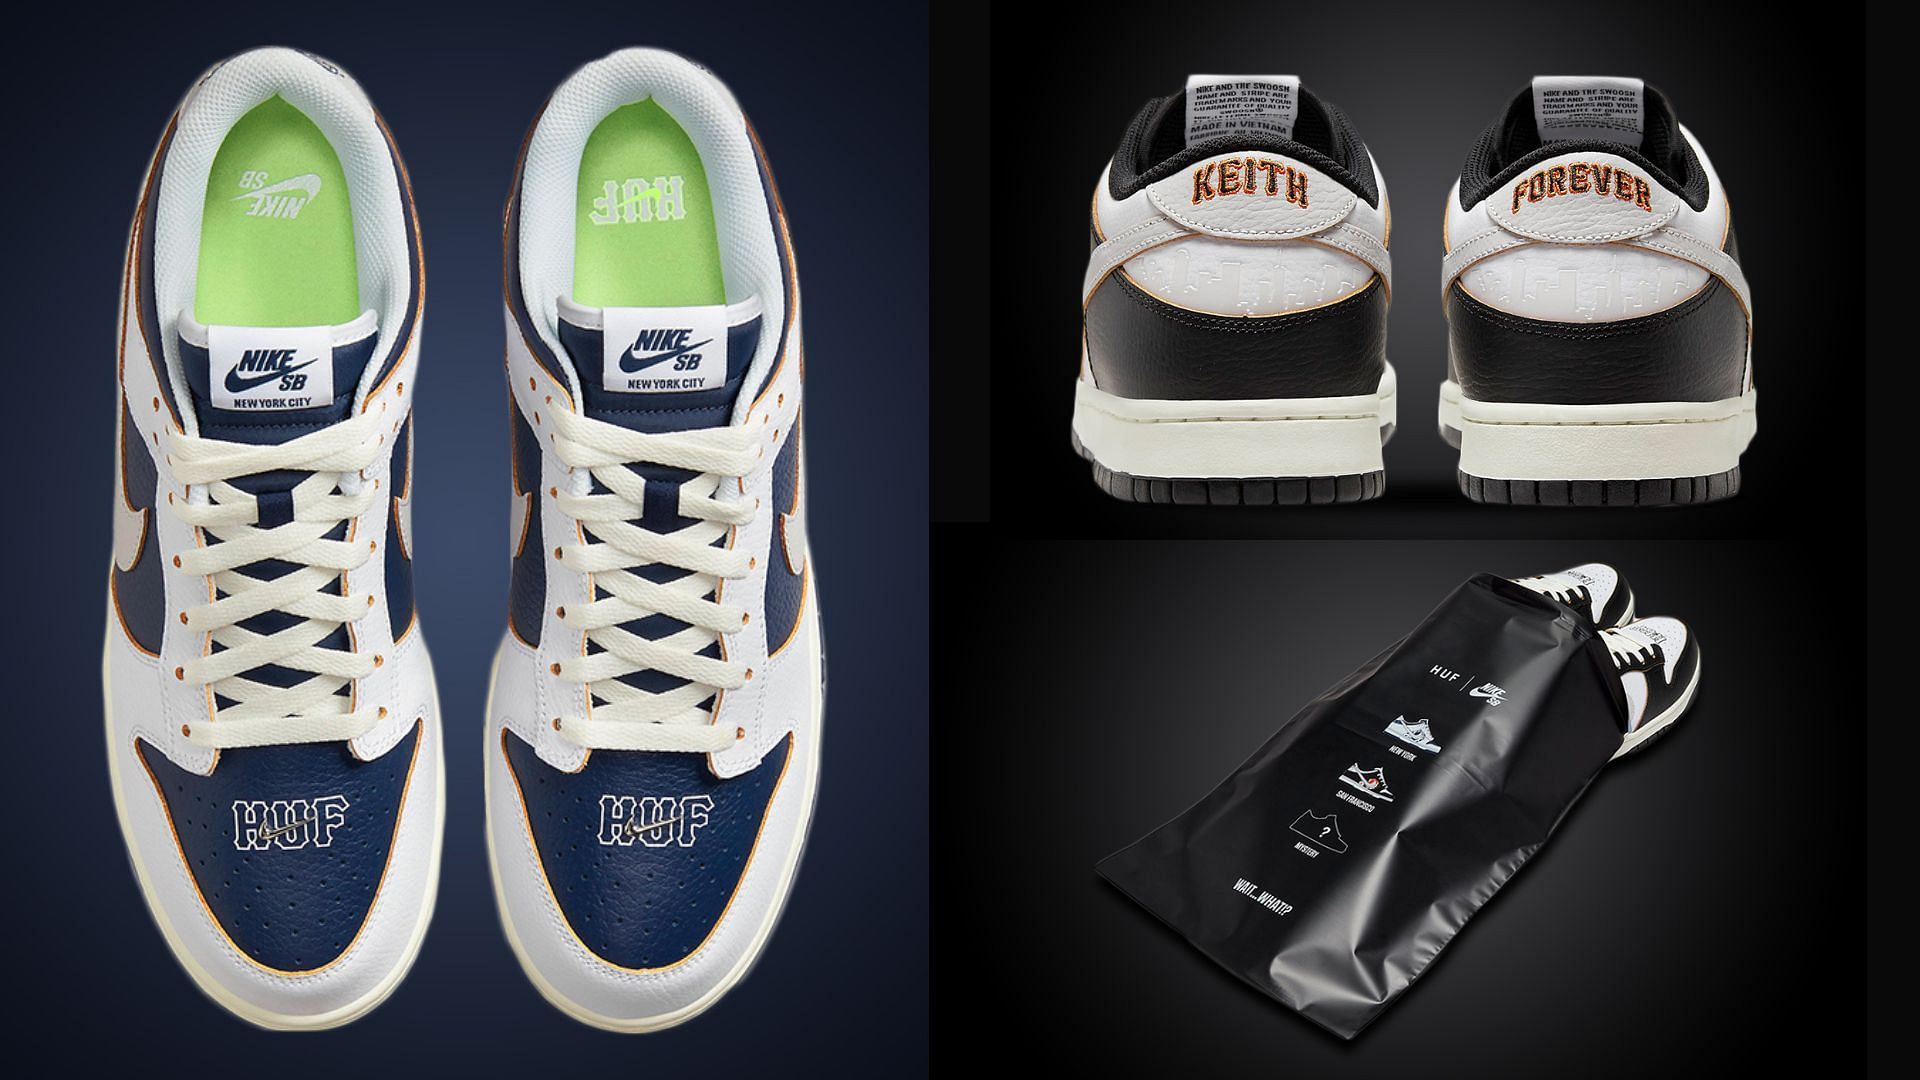 Look at the back heels and customized shoe packaging of the collab Nike SB Dunk Low shoes (Image via Nike)